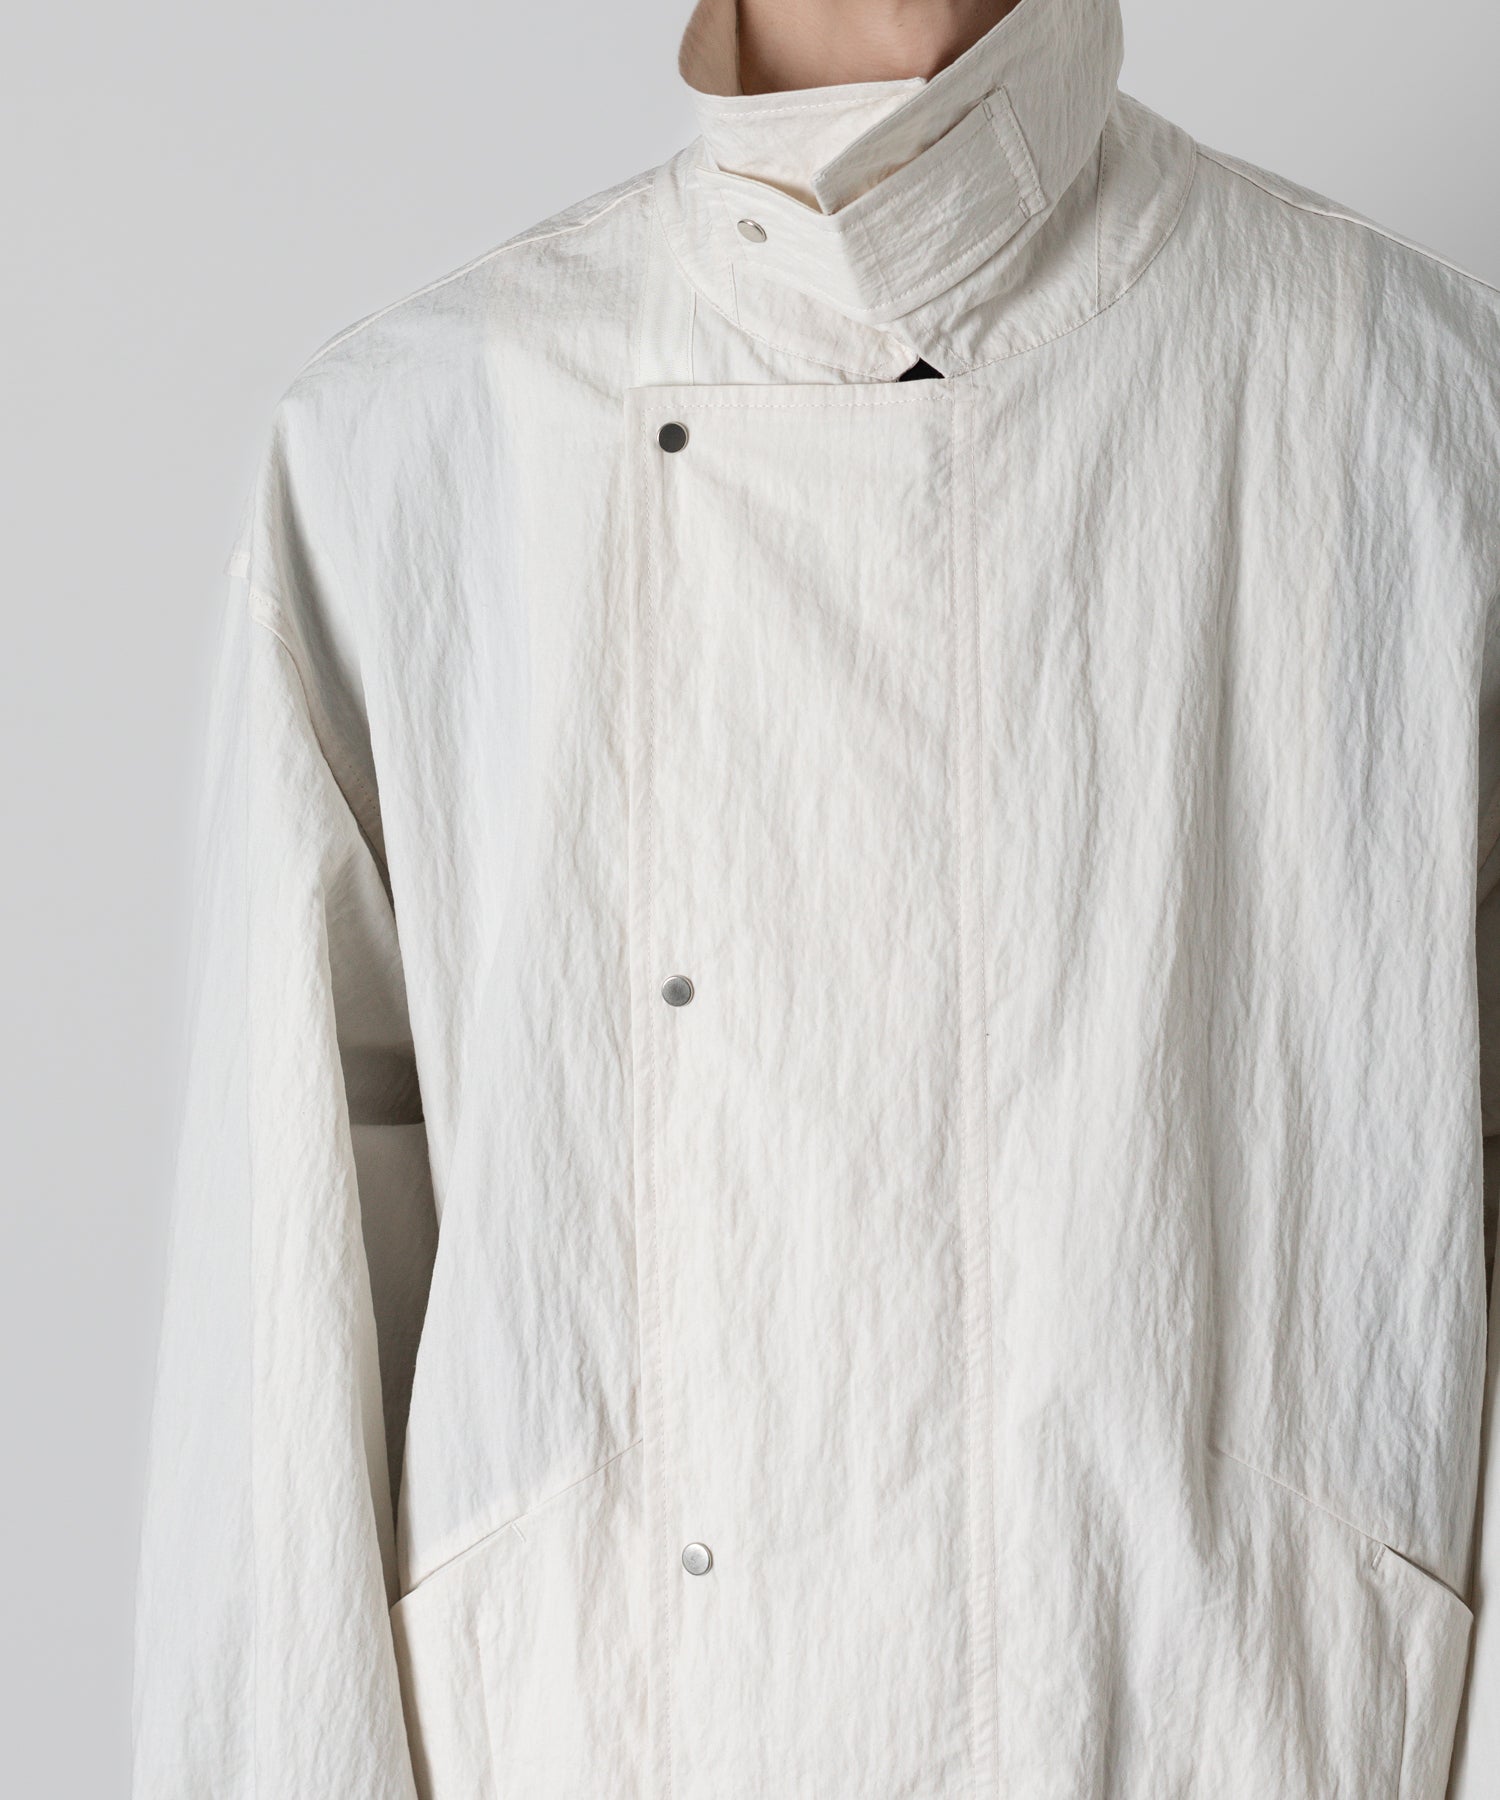 【ATTACHMENT -LIMITED-】ATTACHMENT アタッチメントのNY WEATHER CLOTH MK3 JACKET - OFF WHITE 公式通販サイトsession福岡セレクトショップ